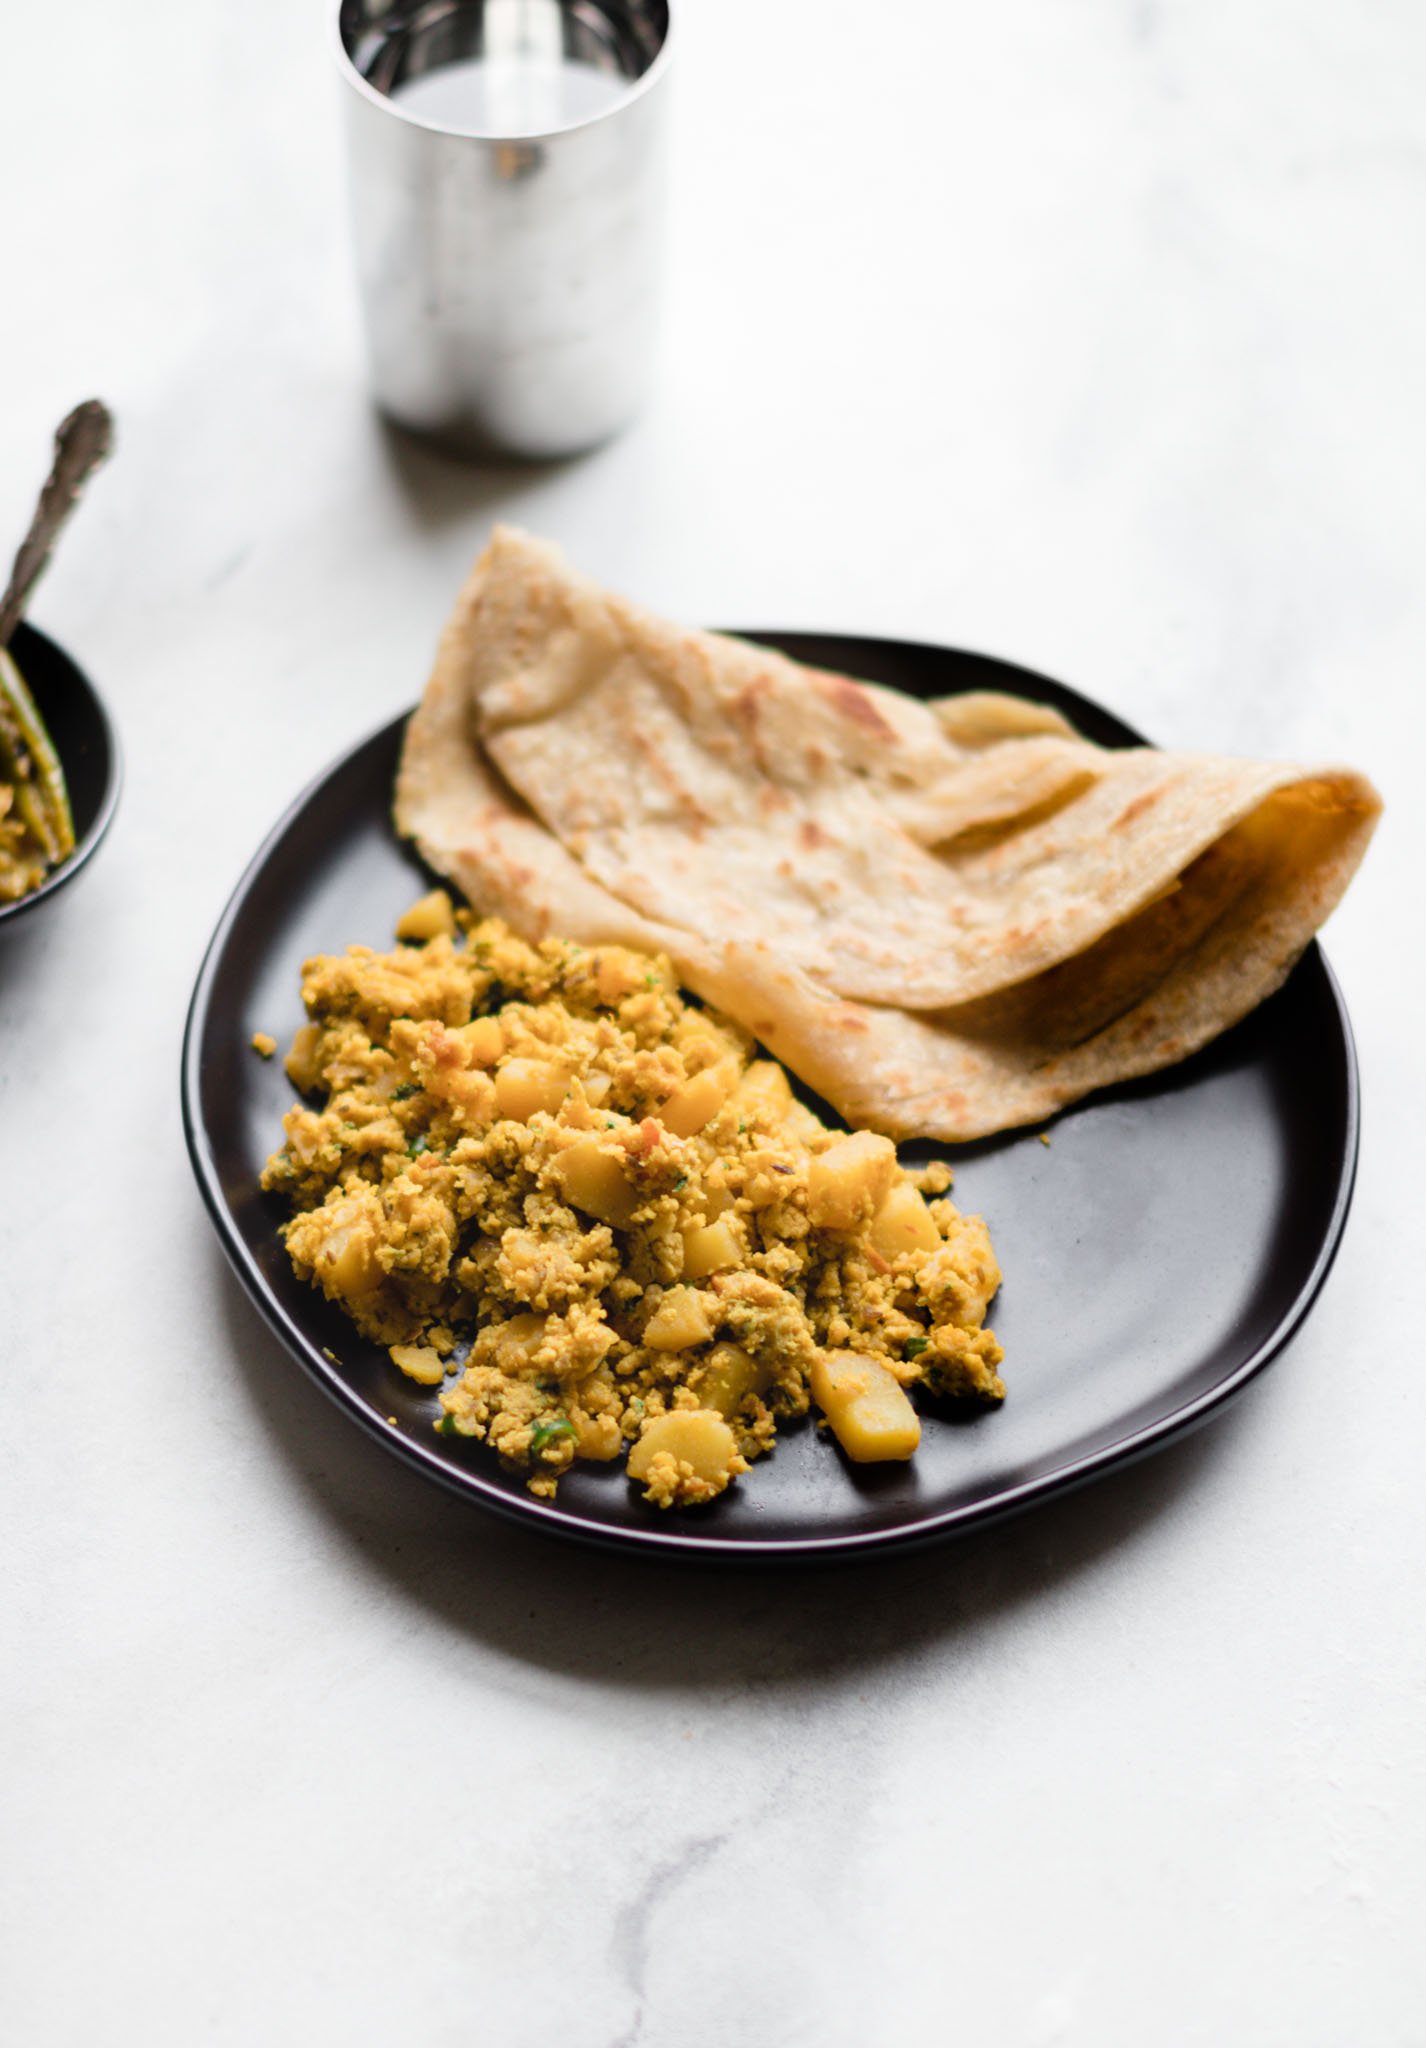 Scrambled Egg and Potato Curry (aloo anday ki bhujia) with Paratha on a black plate